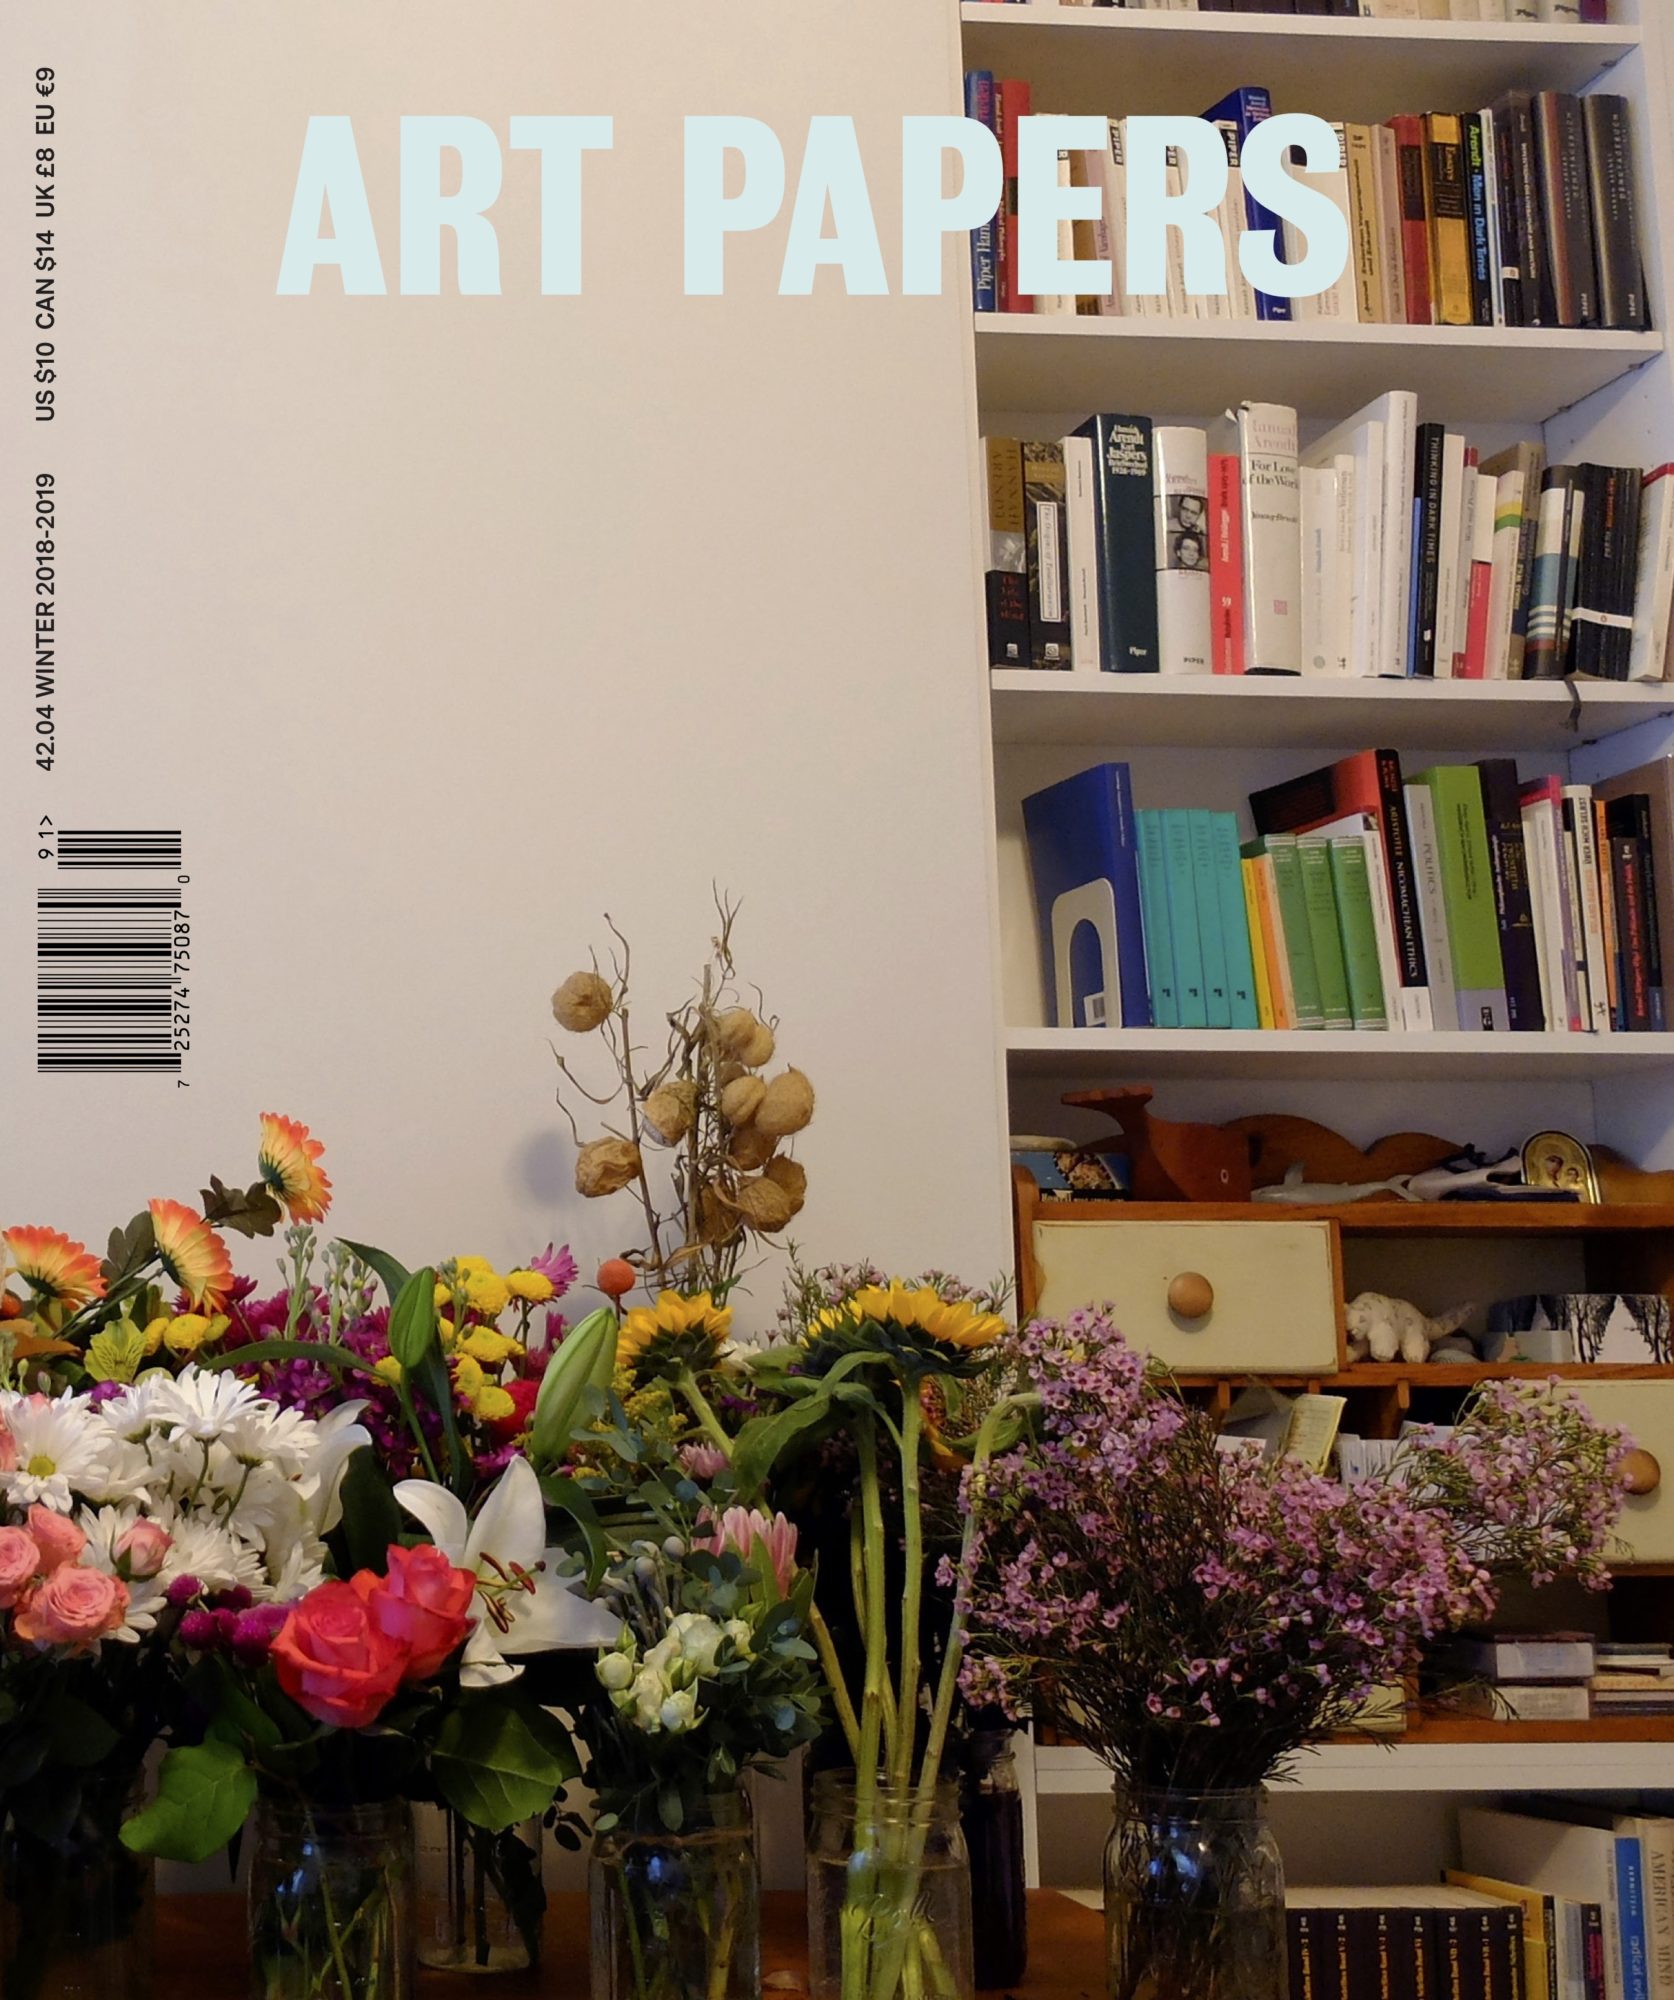 cover of art papers winter 2018 magazine with art papers name center-aligned, photo of bookshelf in the background and colorful flowers in vases in foreground